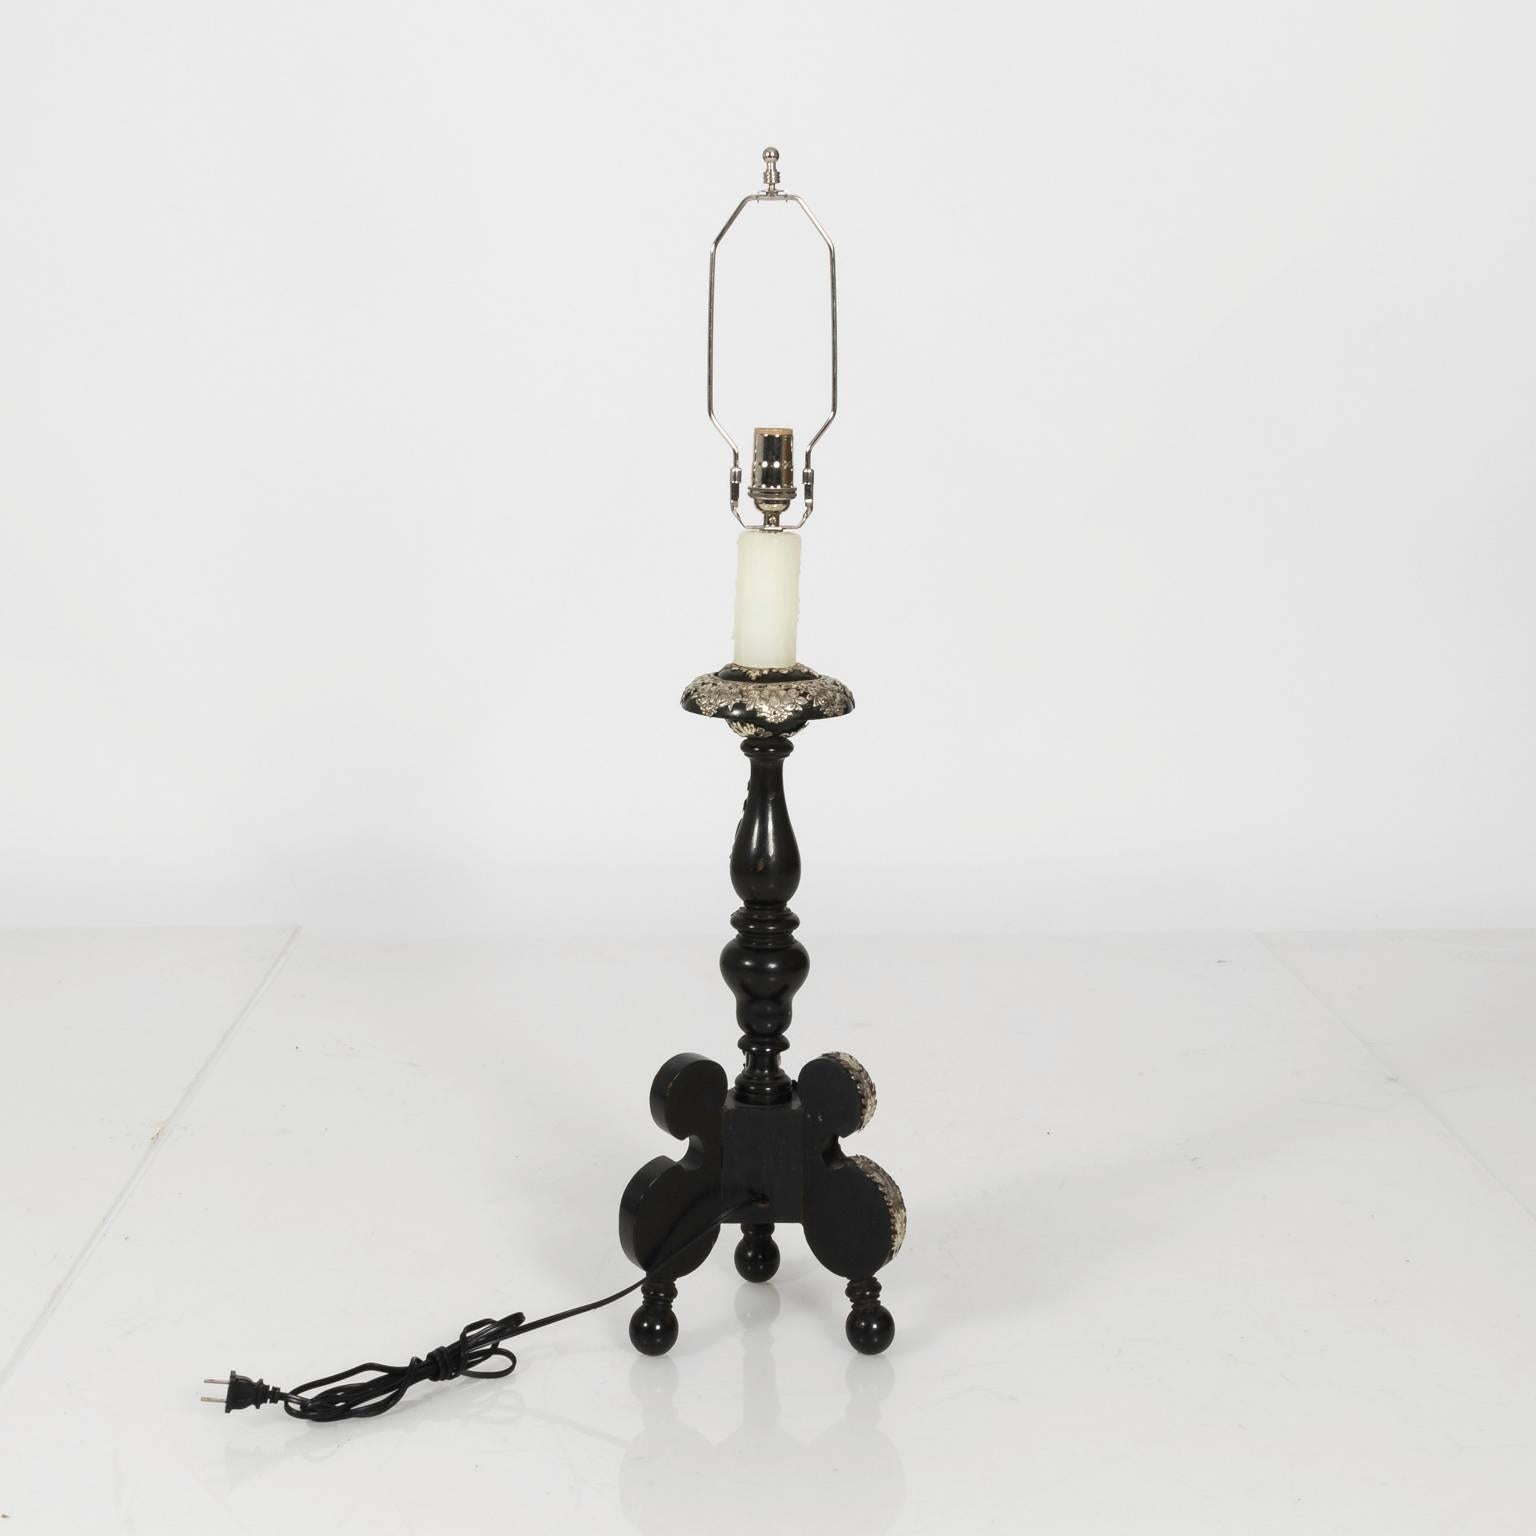 Pair of black Italian Rococo style lamps with decorative silver foliage overlay, circa 1920.